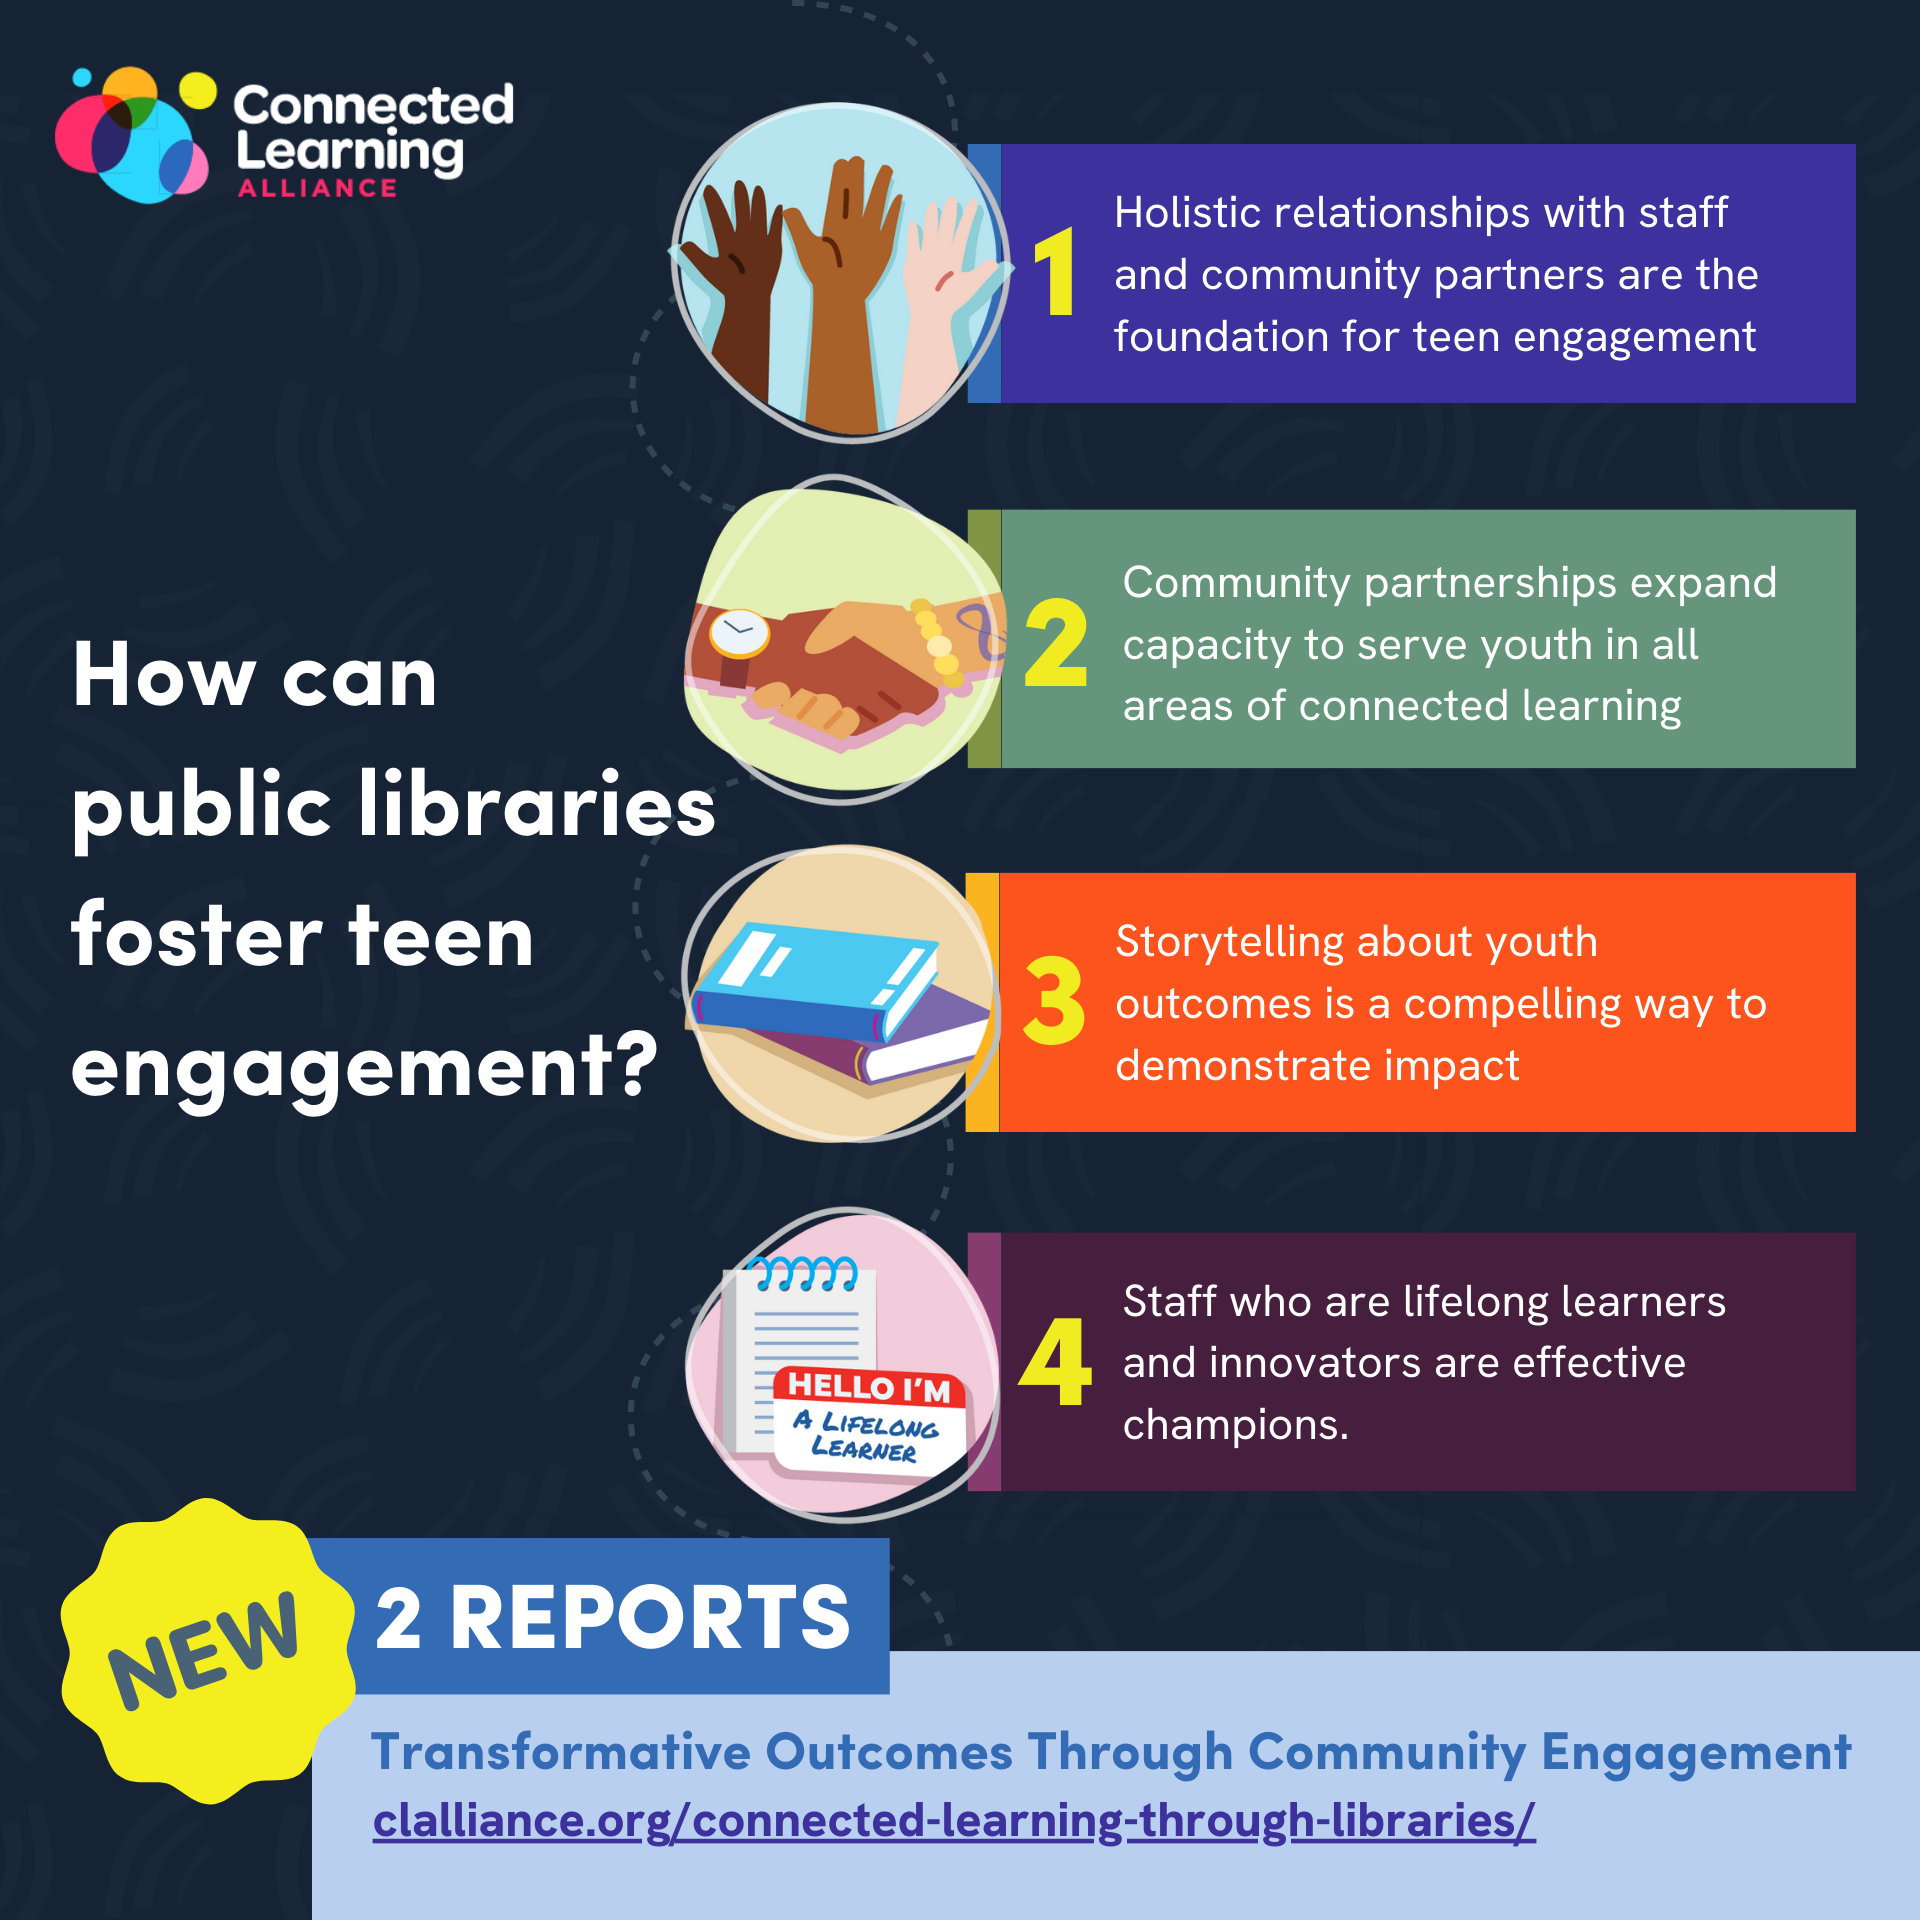 The image is a colorful infographic titled “How can public libraries foster teen engagement?” It features four key points with corresponding illustrations:      Holistic Partnerships: The foundation for teen engagement involves holistic relationships with staff and community partners, symbolized by a handshake.     Community Partnerships: Expanding capacity to serve youth in all areas of connected learning, represented by an open book.     Storytelling About Youth Outcomes: Demonstrating impact through compelling storytelling, depicted by a light bulb.     Innovative Staff: Effective champions are staff who are lifelong learners and innovators, symbolized by a rocket ship. The bottom of the images highlights two new reports titled "Transformative Outcomes through Community Engagement" available at clalliance.org/connected-learning-through-libraries